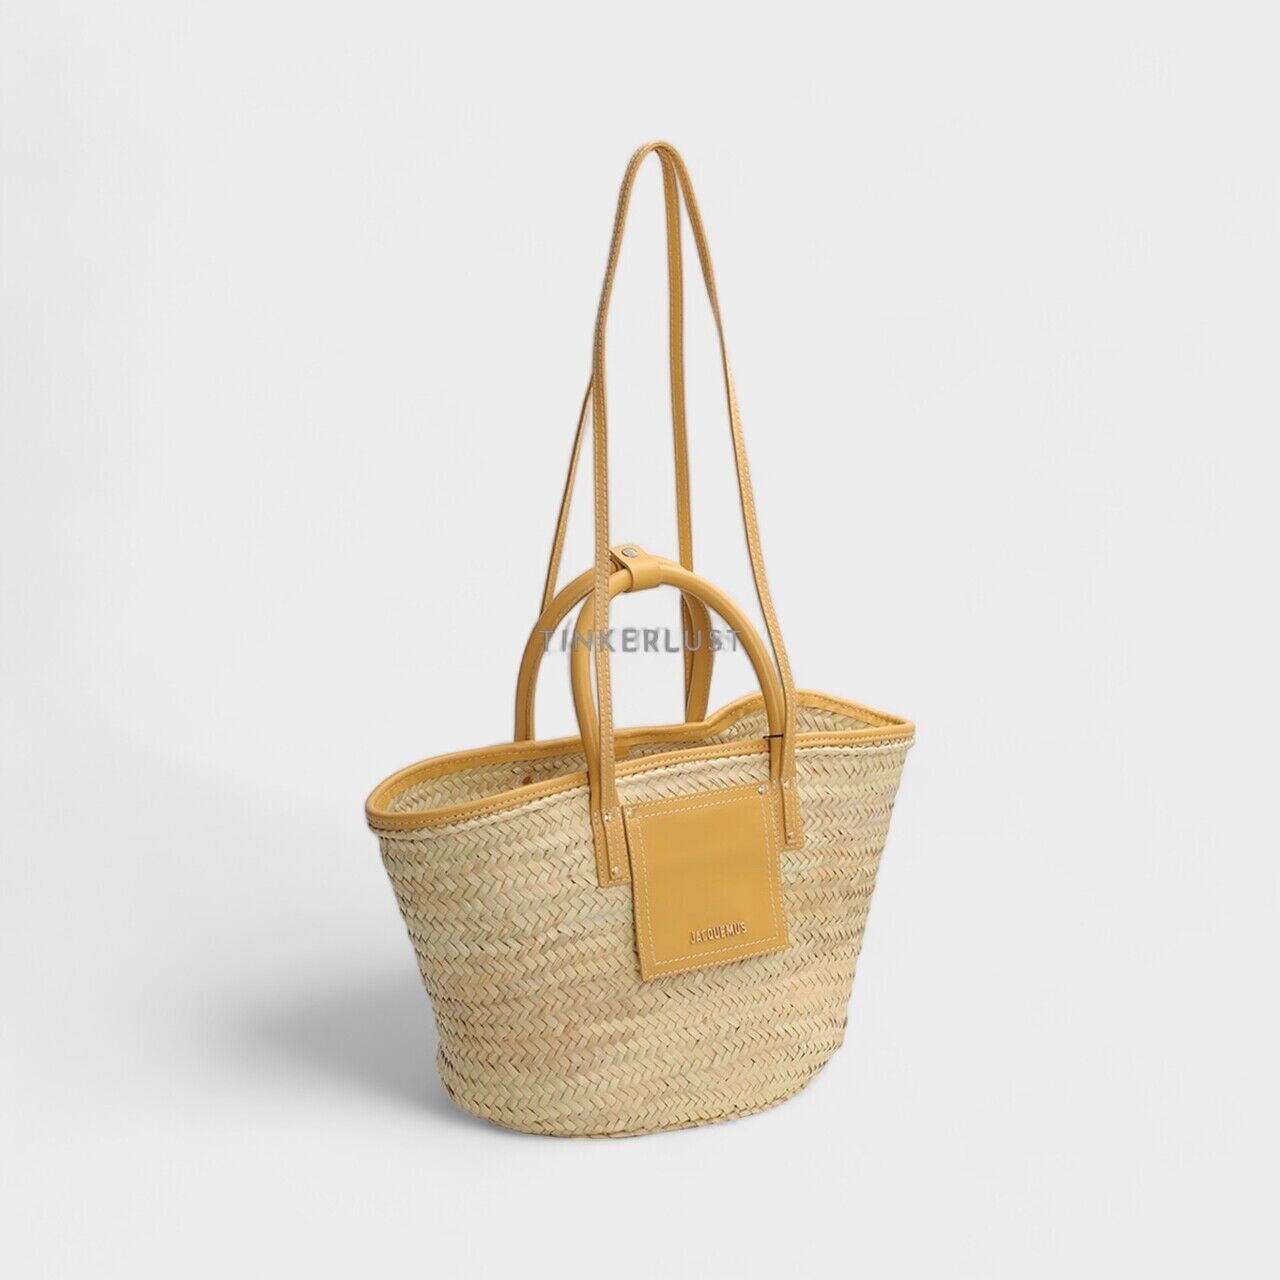 Jacquemus Le Panier Soli in Dark Yellow Smooth Leather Basket Bag 